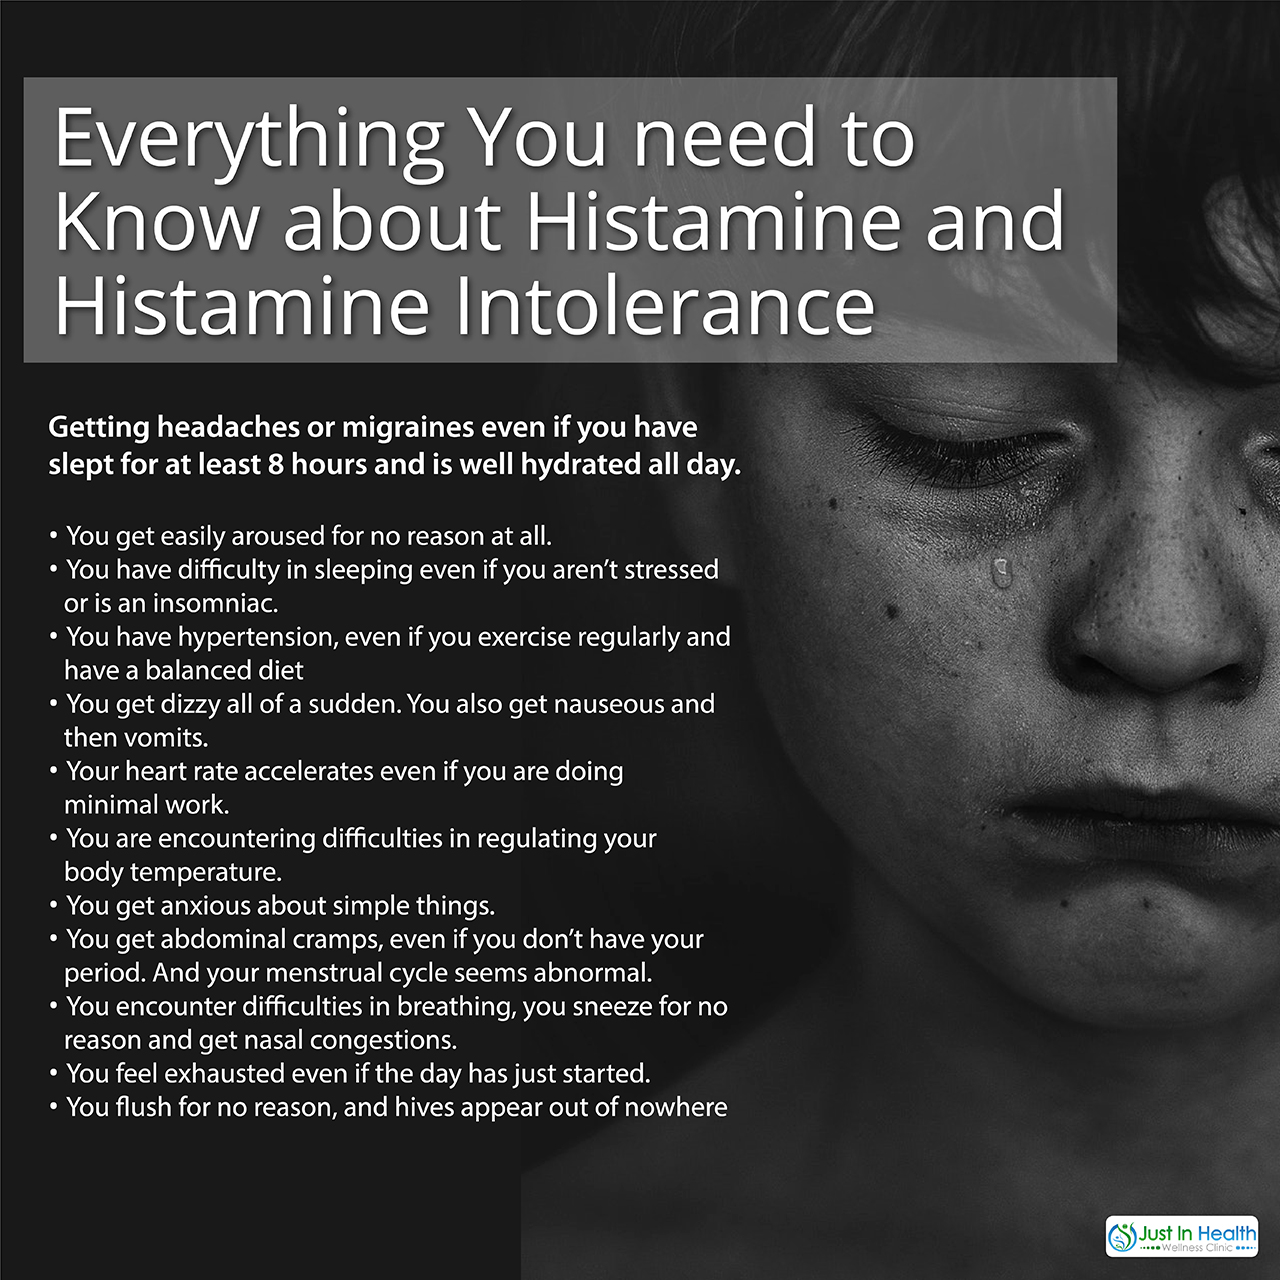 Histamine Intolerance Signs and Symptoms